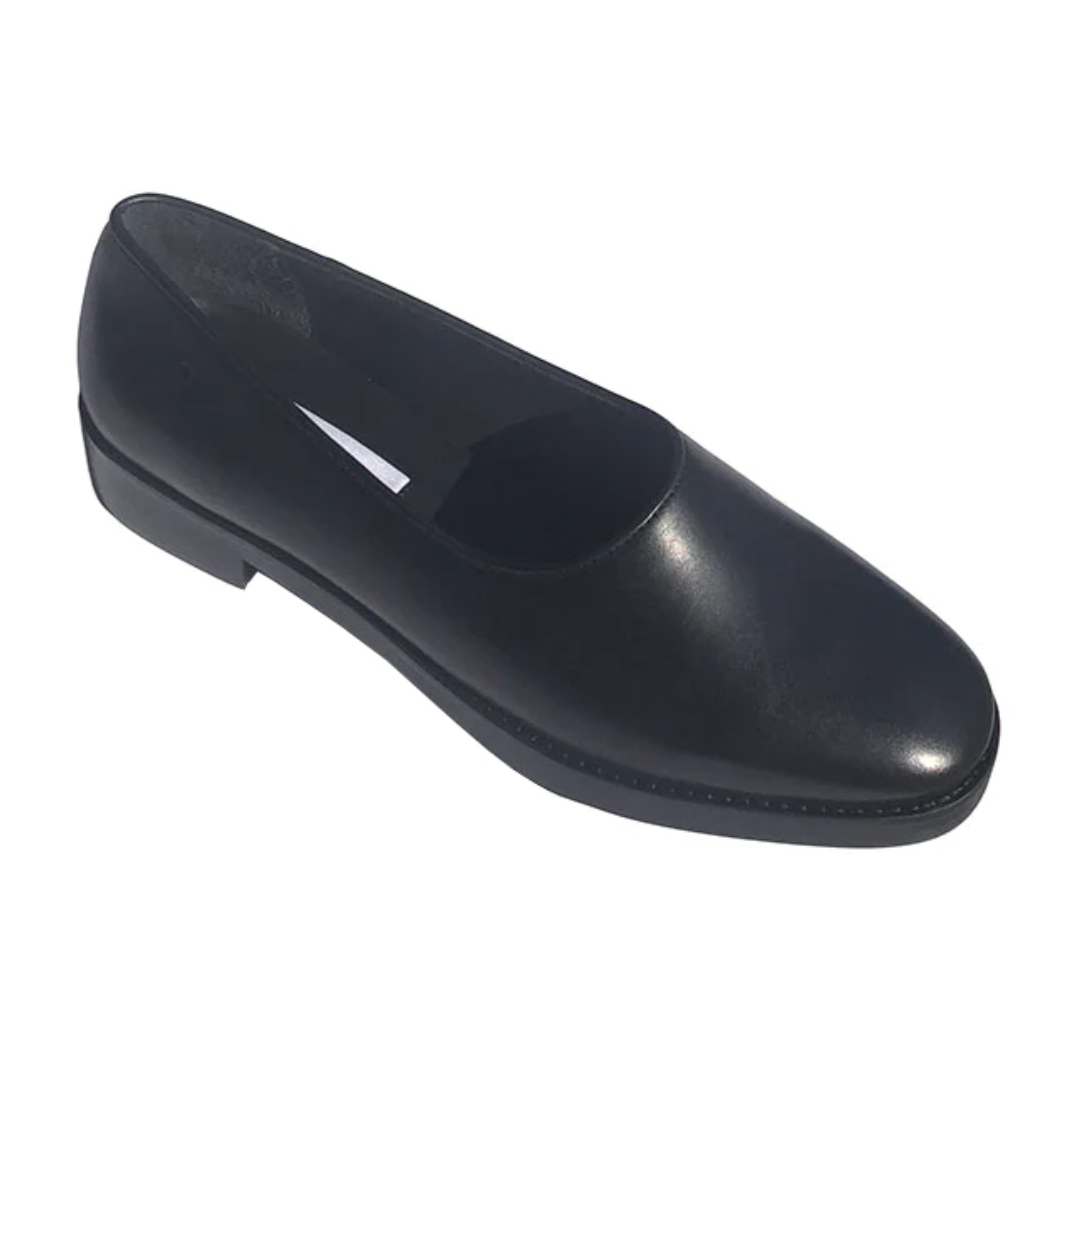 Product Image for Glove Shoe, Black